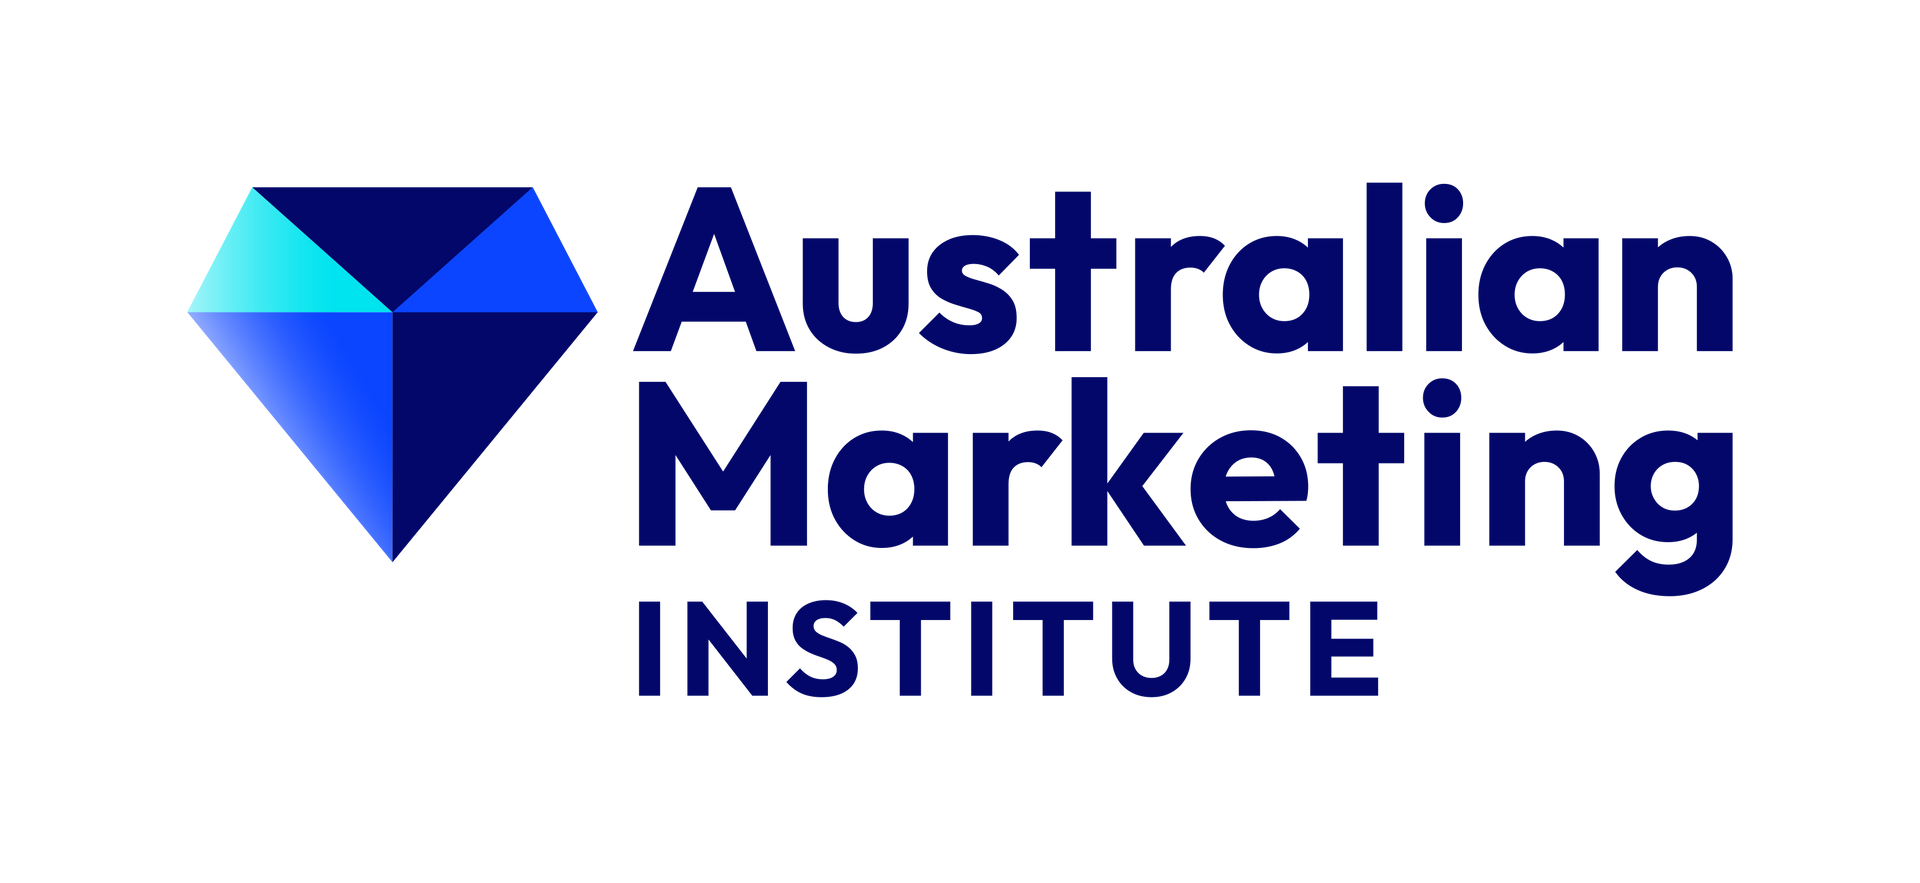 The logo for the australian marketing institute has a blue diamond in the middle.